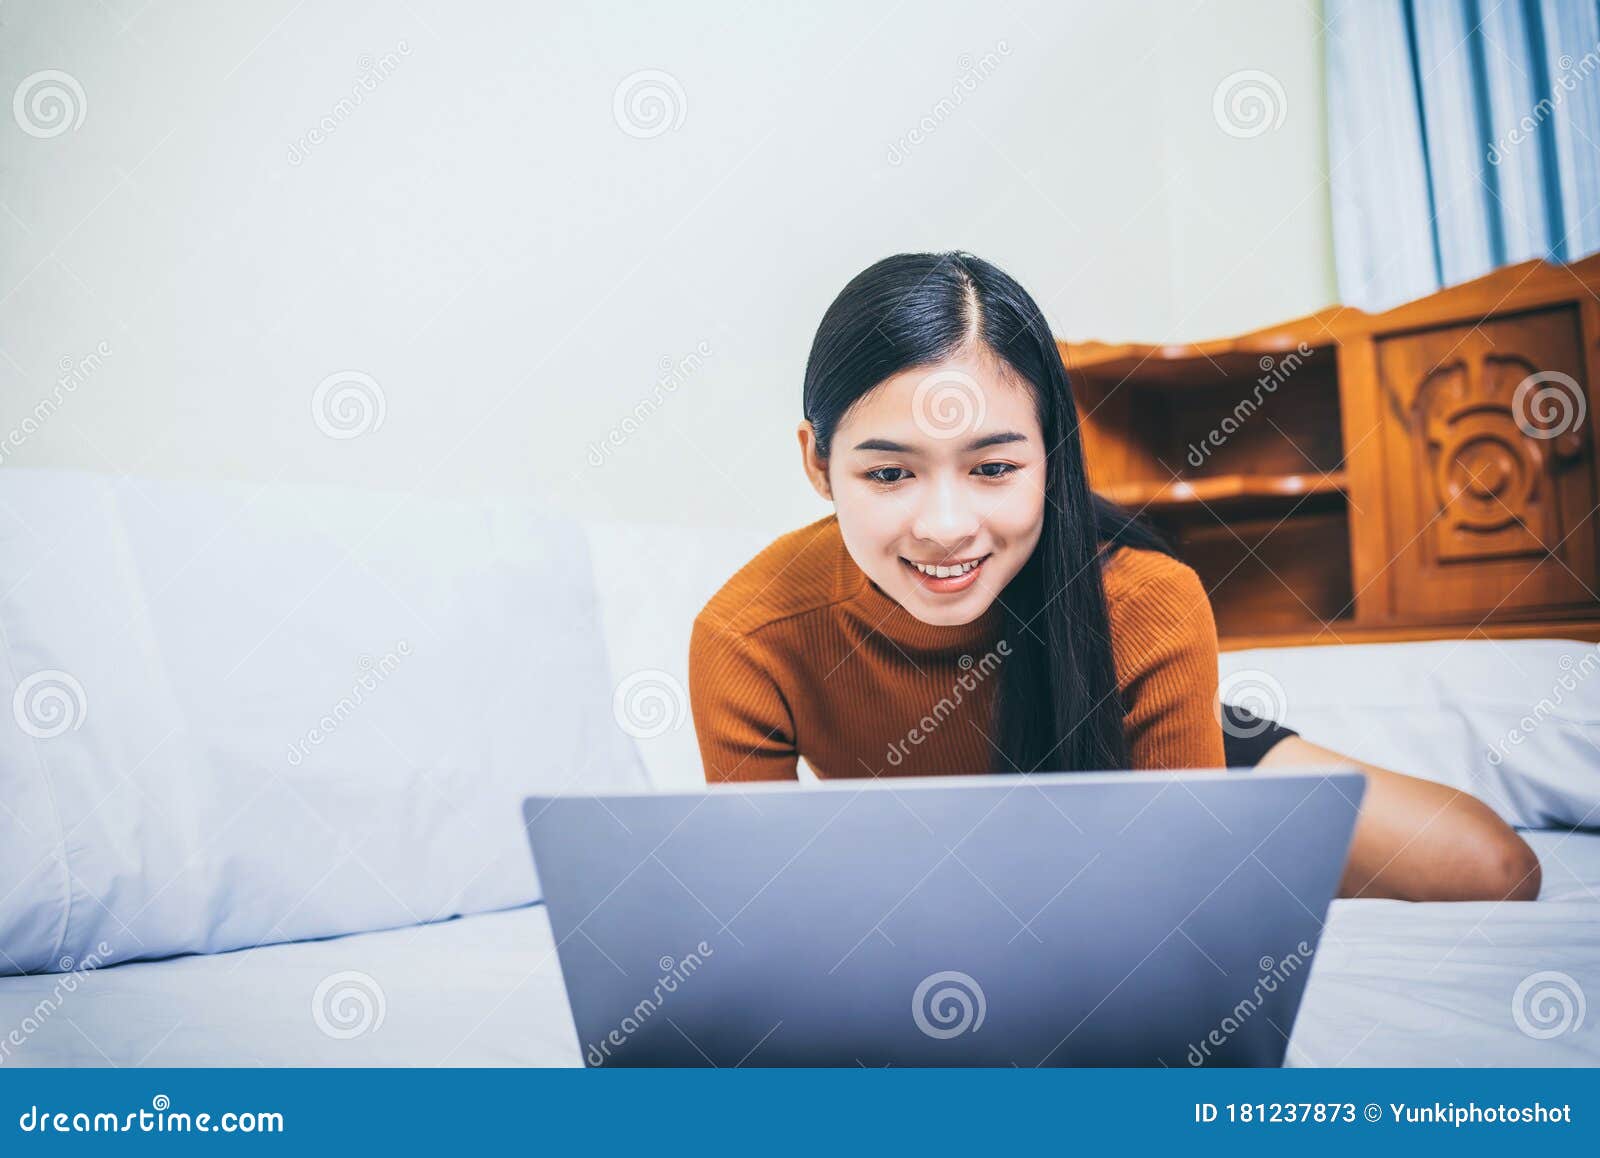 happy casual asian woman working in bed with laptop in the house, wfh work from home concept